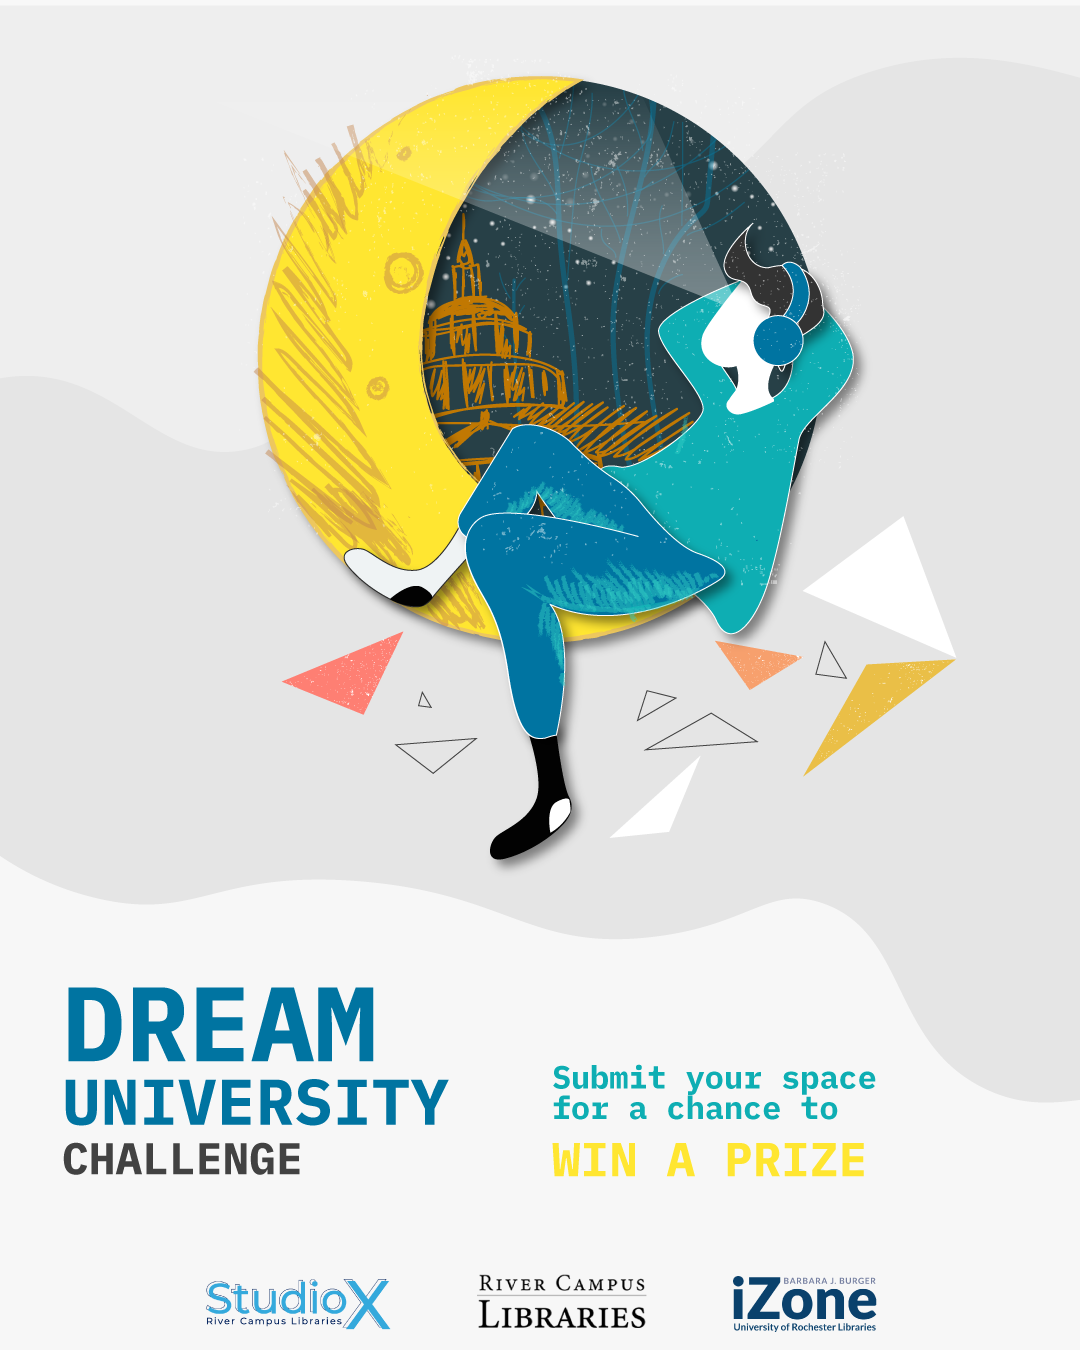 Promotional graphic for the Dream University Challenge. There is an illustration of a person reclining on a half moon and looking into the sky at the top. The person is wearing headphones, and there is a sketch of Rush Rhees Library in the background. On the bottom are the Studio X, River Campus Libraries, and iZone wordmarks. Underneath the illustration is the text, "Dream University Challenge. Submit your space for a chance to win a prize."